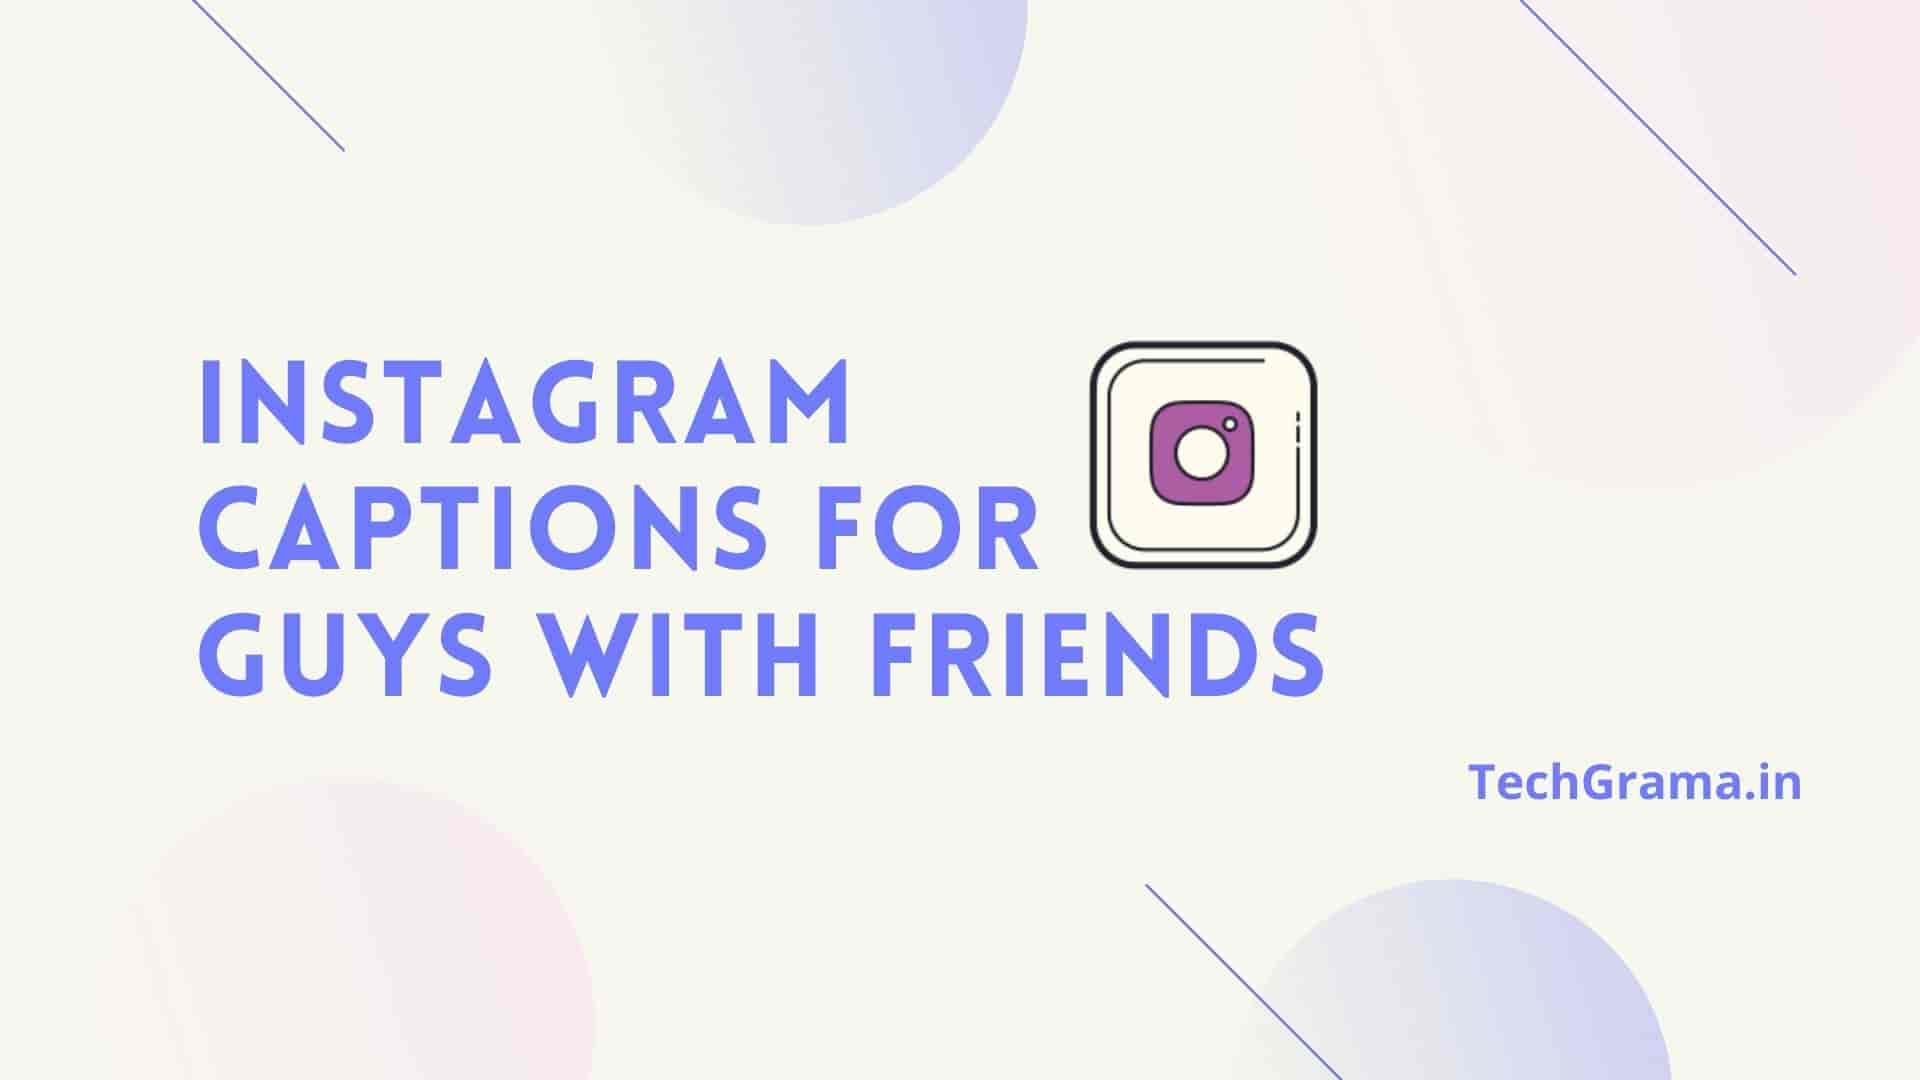 instagram captions for guys with friends, Instagram Captions For Guys, short instagram captions for guys, Best Instagram Captions For Guys, Classy Captions For Guys, Cool Instagram Captions For Guys, Good Instagram Captions For Guys, Cute Instagram Captions For Guys, Badass Instagram Captions For Guys, Guys Captions For Instagram, instagram captions for guys selfies, instagram picture captions for guys